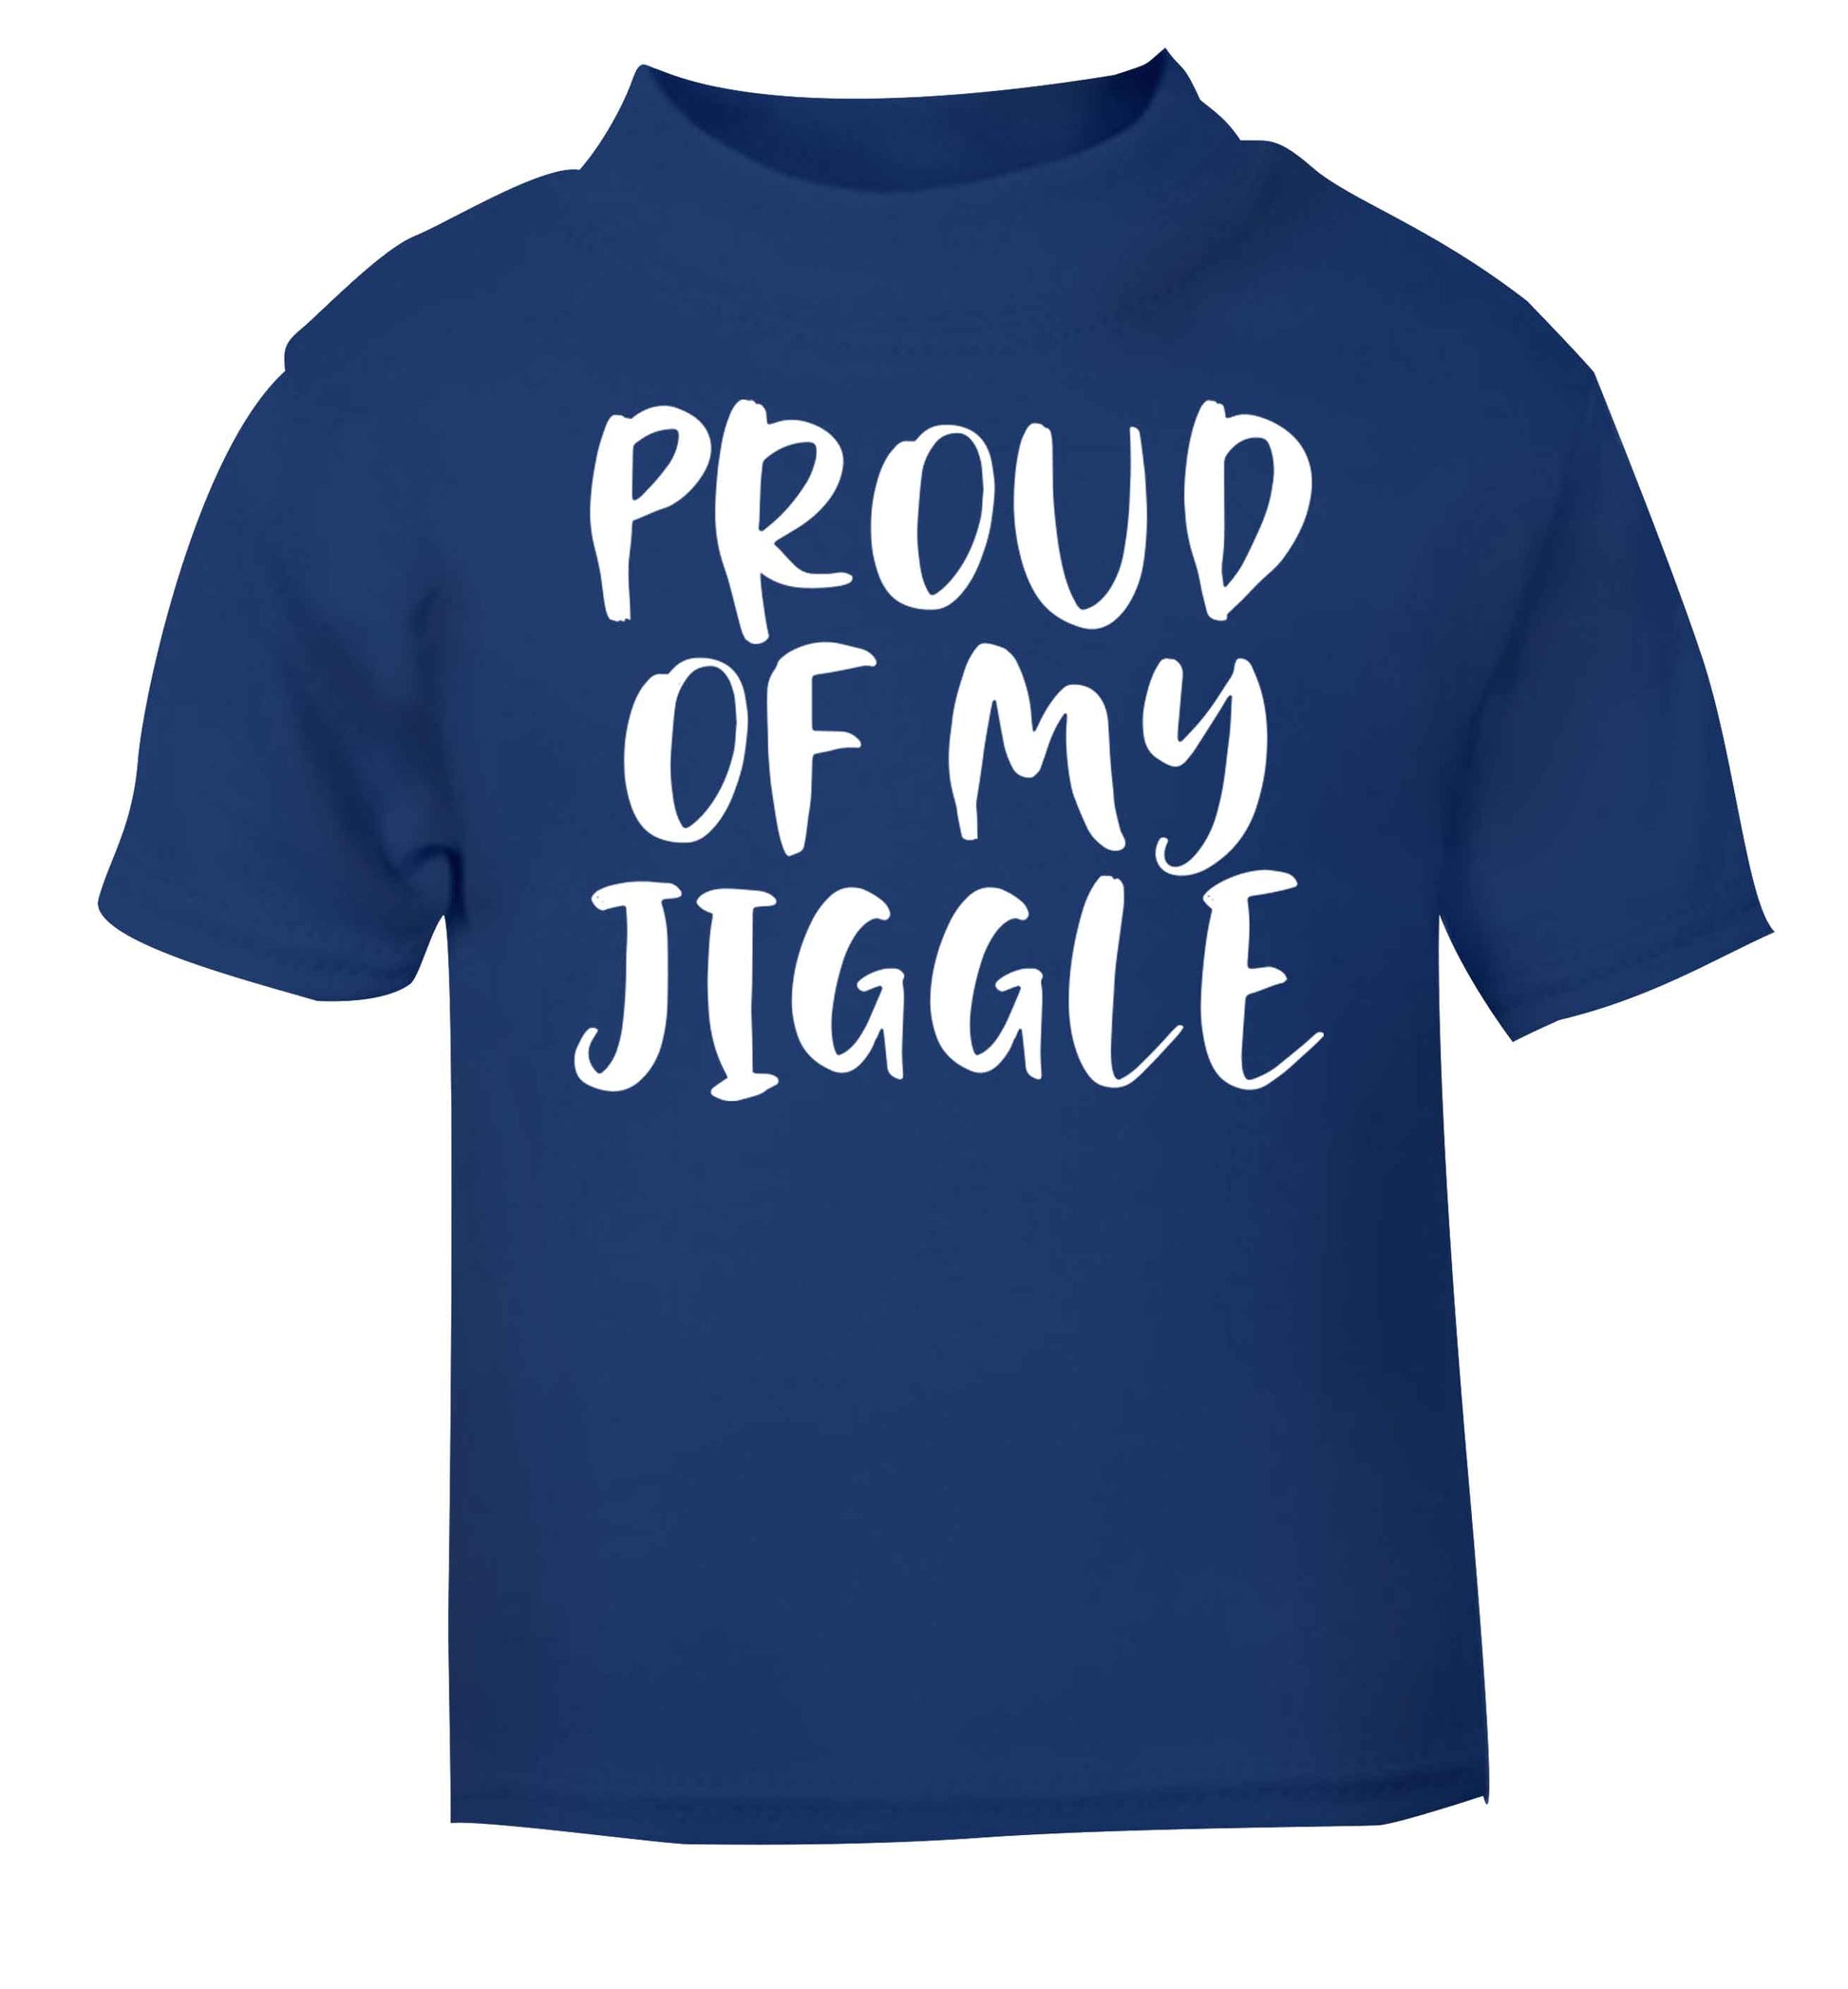 Proud of my jiggle blue baby toddler Tshirt 2 Years